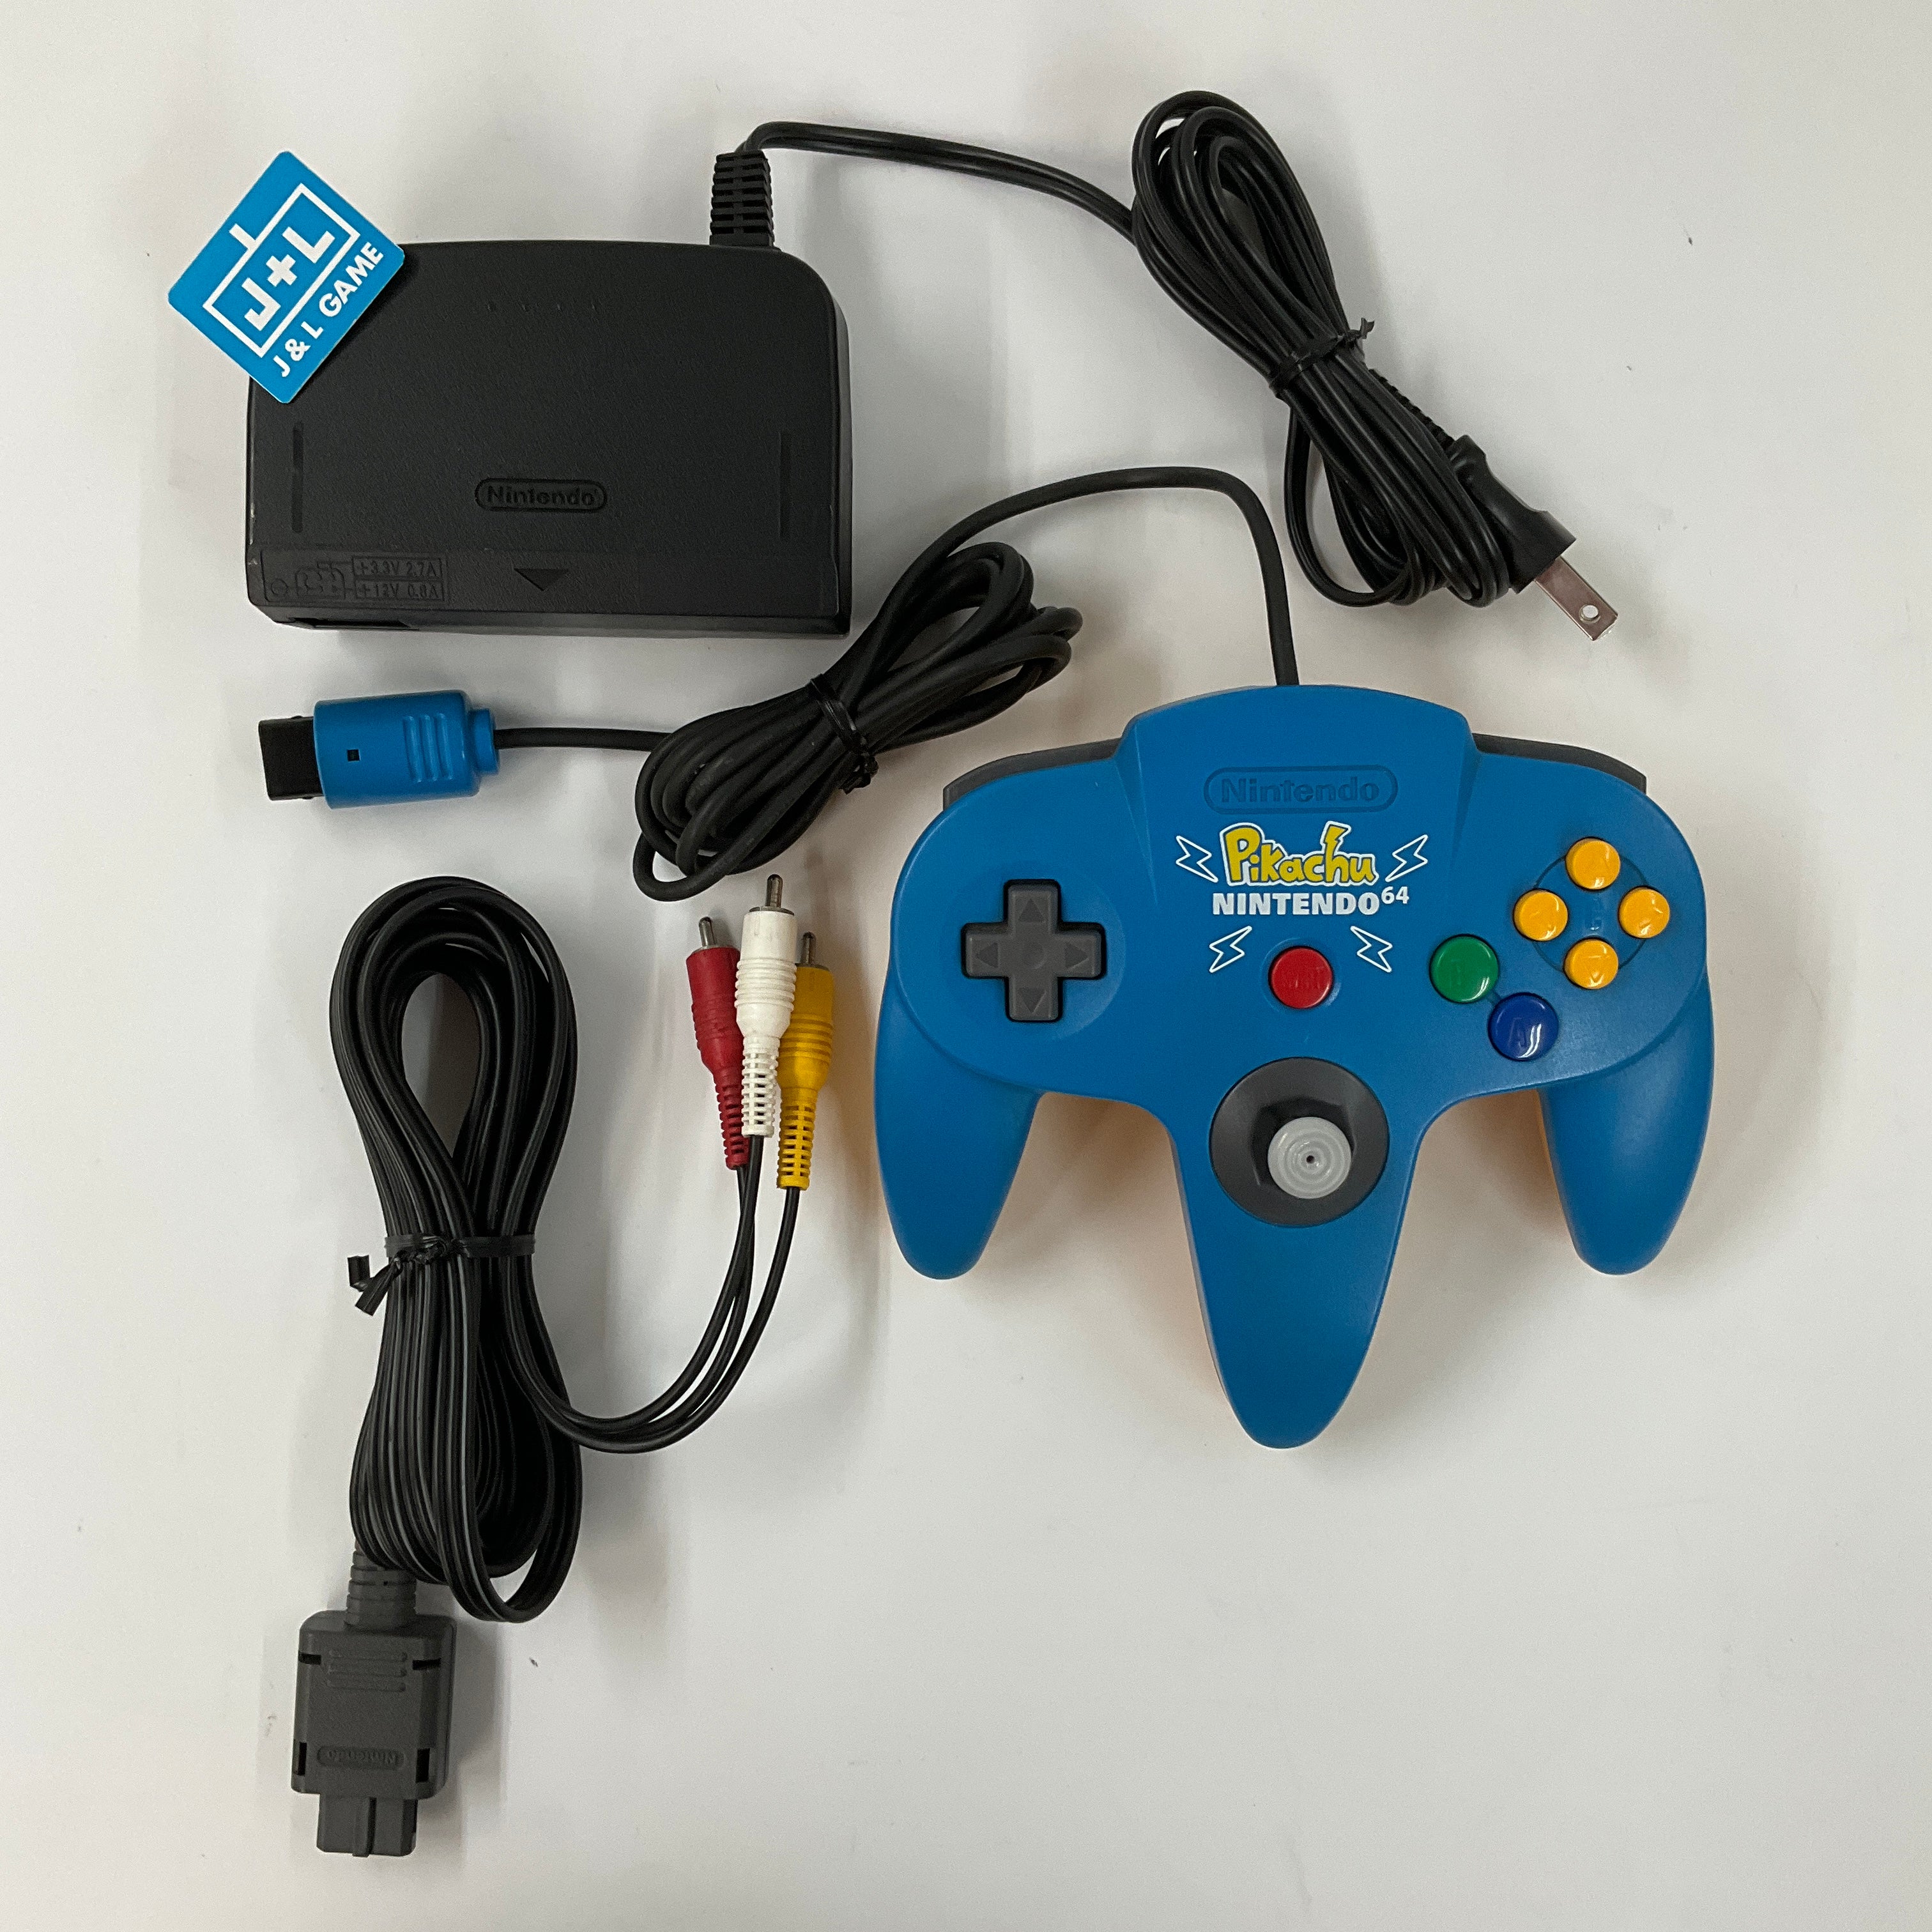 Nintendo 64 Hardware Console (Pikachu Edition) (Blue and Yellow) - (N64) Nintendo 64 (Japanese Import) [Pre-Owned] CONSOLE Nintendo   